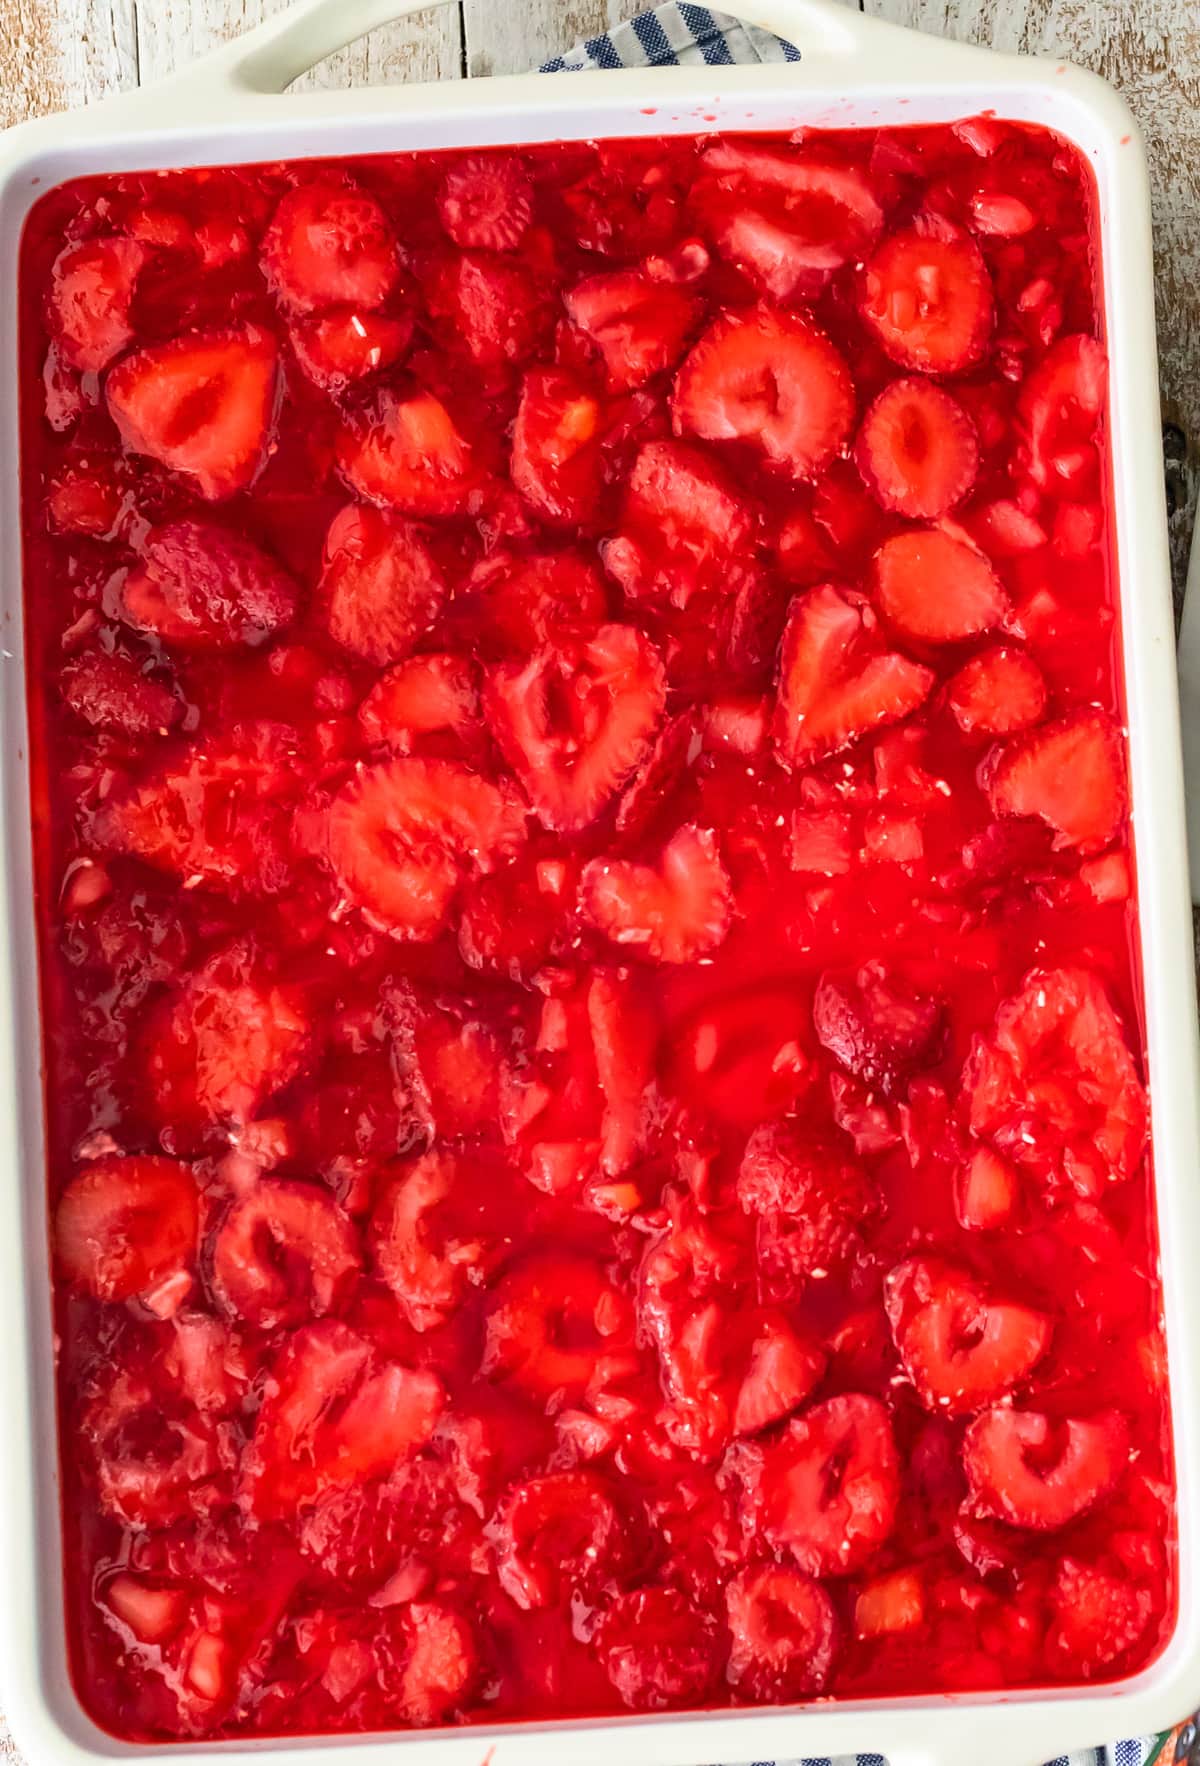 Strawberry Pretzel Salad is an absolute must make during the holidays, especially when you can make it SUGAR FREE but just as delicious as the traditional version! This Sugar Free Strawberry Pretzel Salad recipe is made with layers of salty and buttery pretzels, low fat cream cheese/whipped cream, and of course and tangy strawberry jello topping. It's a delicious side dish or even dessert for Christmas, Easter, Thanksgiving, and beyond!